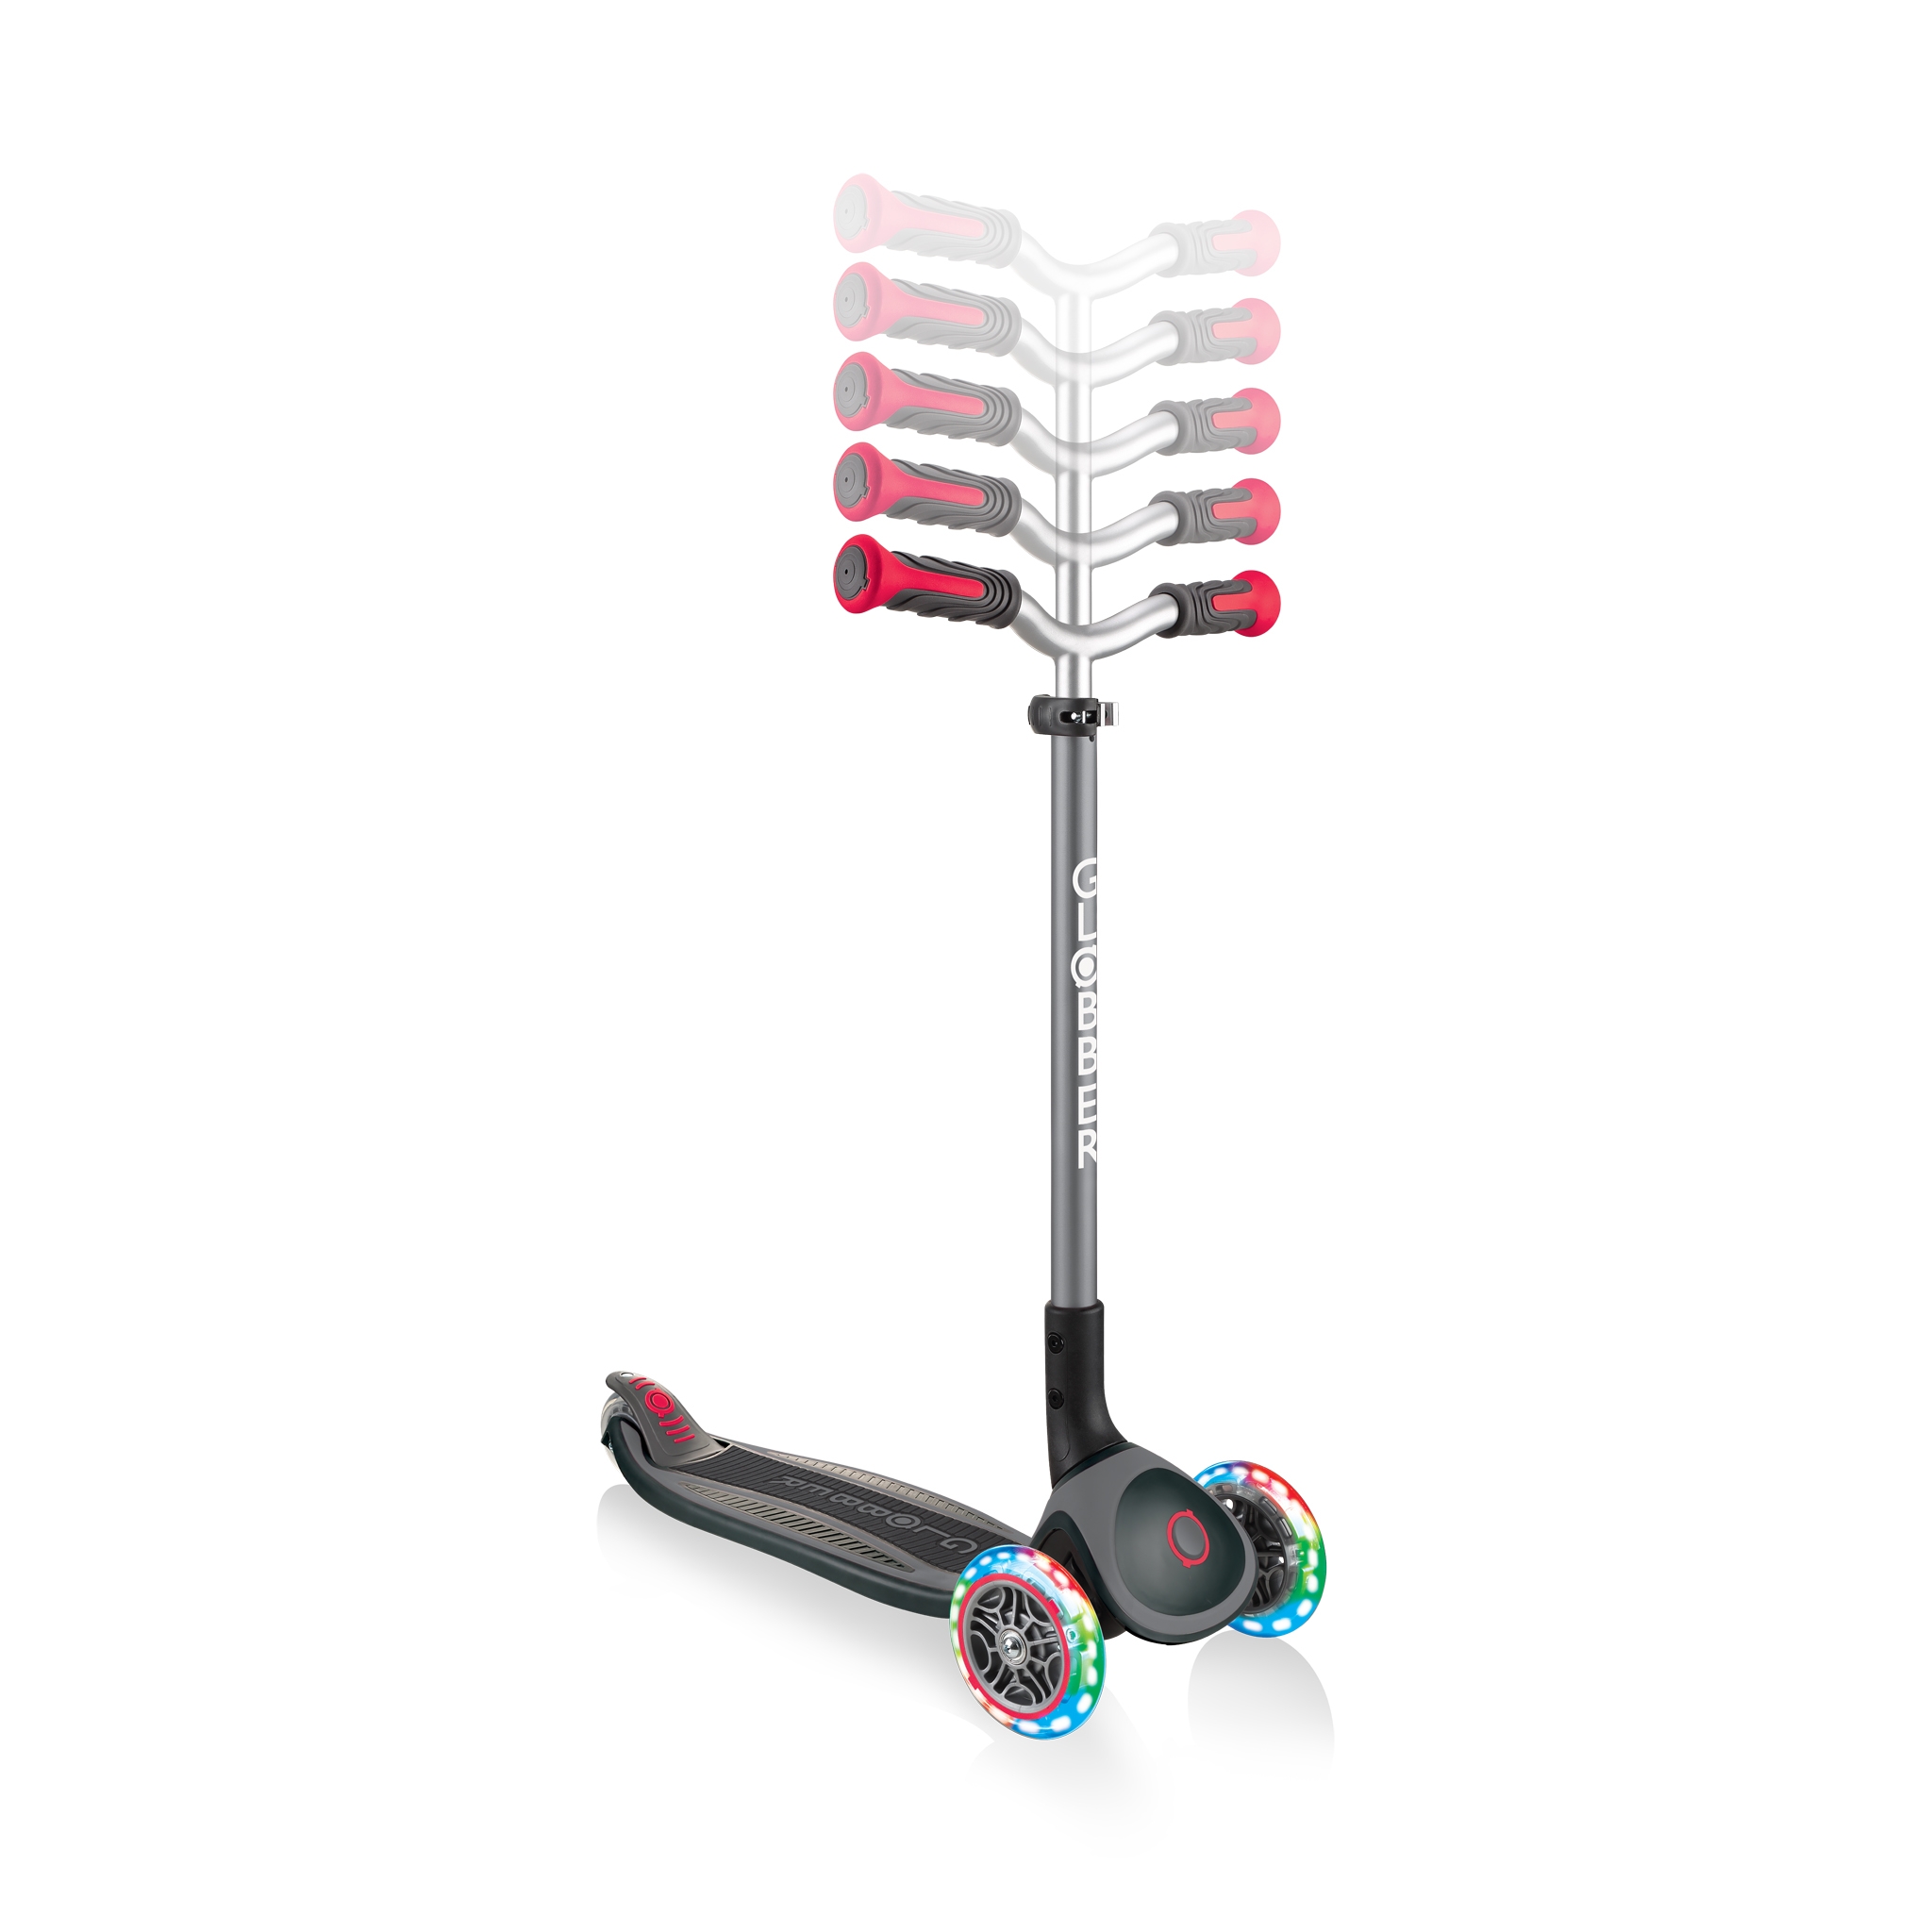 Globber-MASTER-LIGHTS-premium-3-wheel-foldable-light-up-scooters-for-kids-with-5-height-adjustable-T-bar_black-red 2